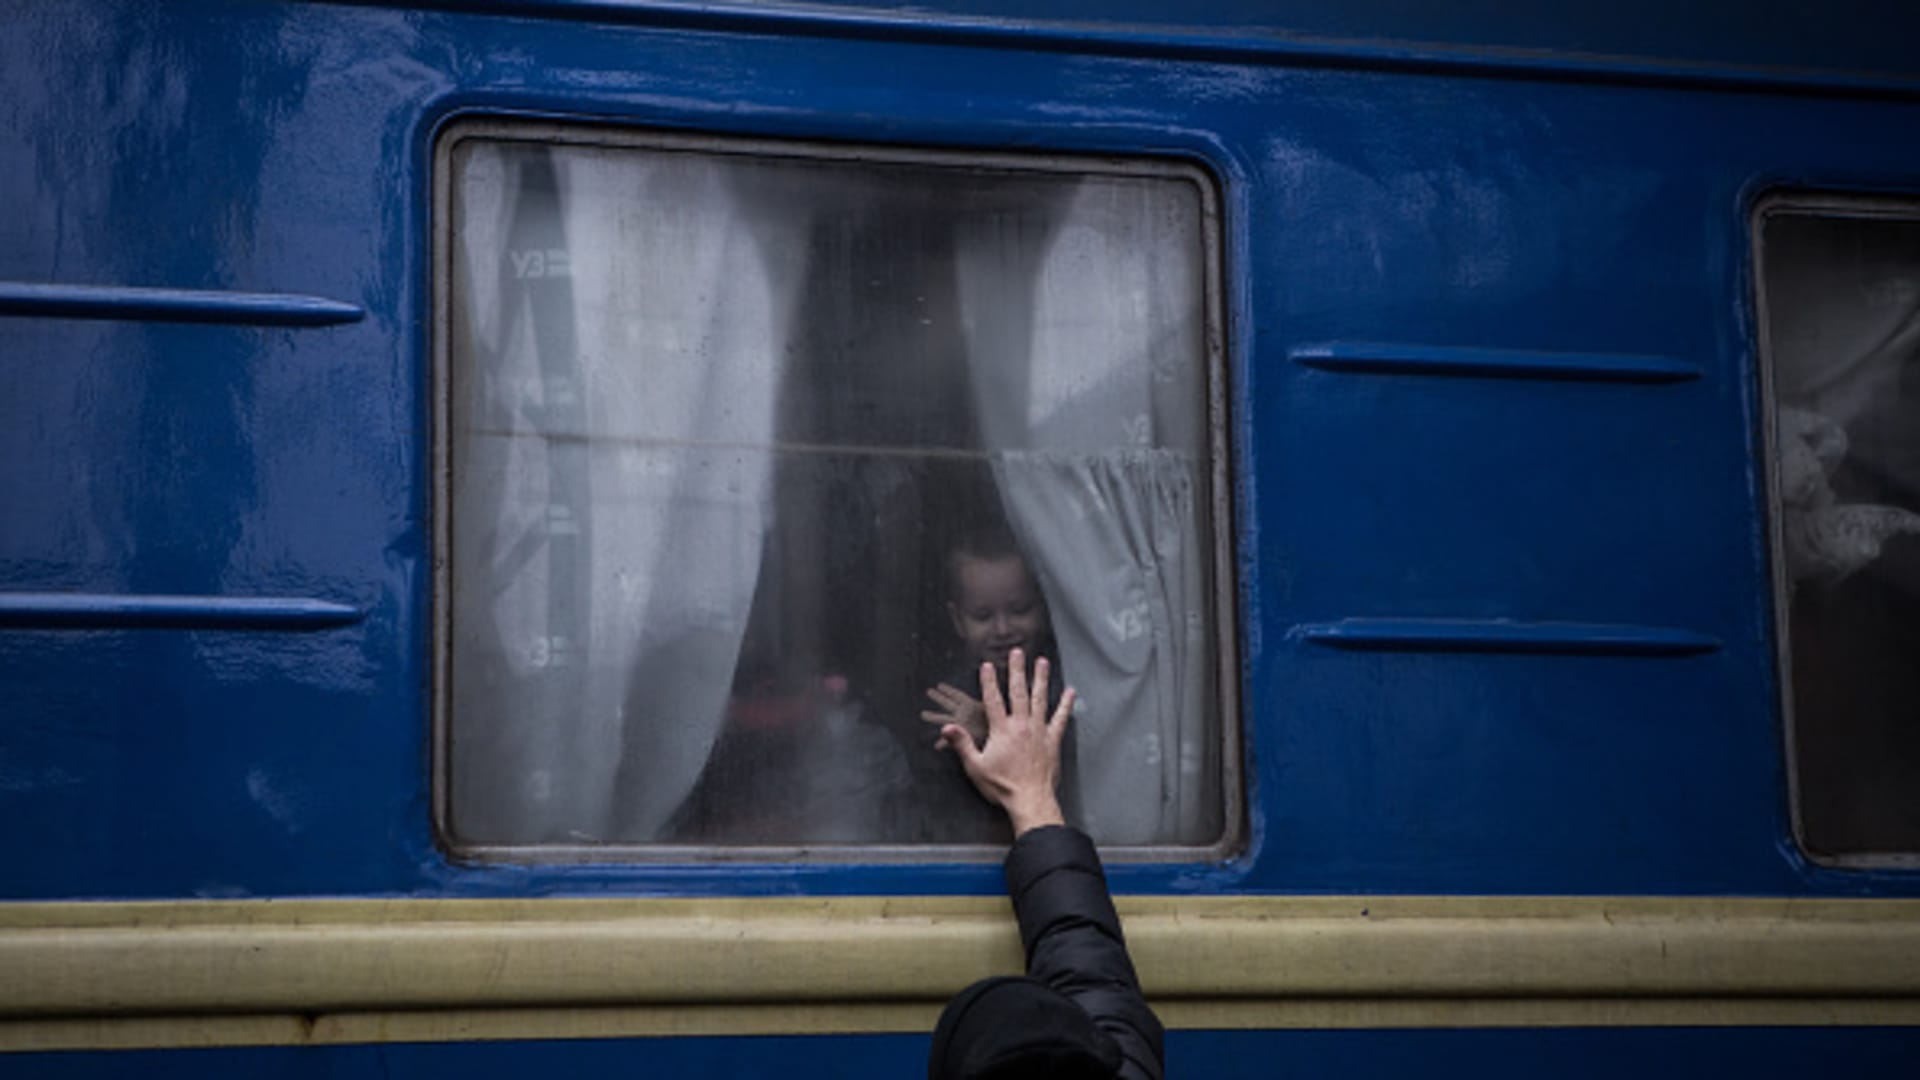 People wait to depart to Lviv by train on the 7th day since start of large-scale Russian attacks in the country, in Dnipro, Ukraine on March 02, 2022.